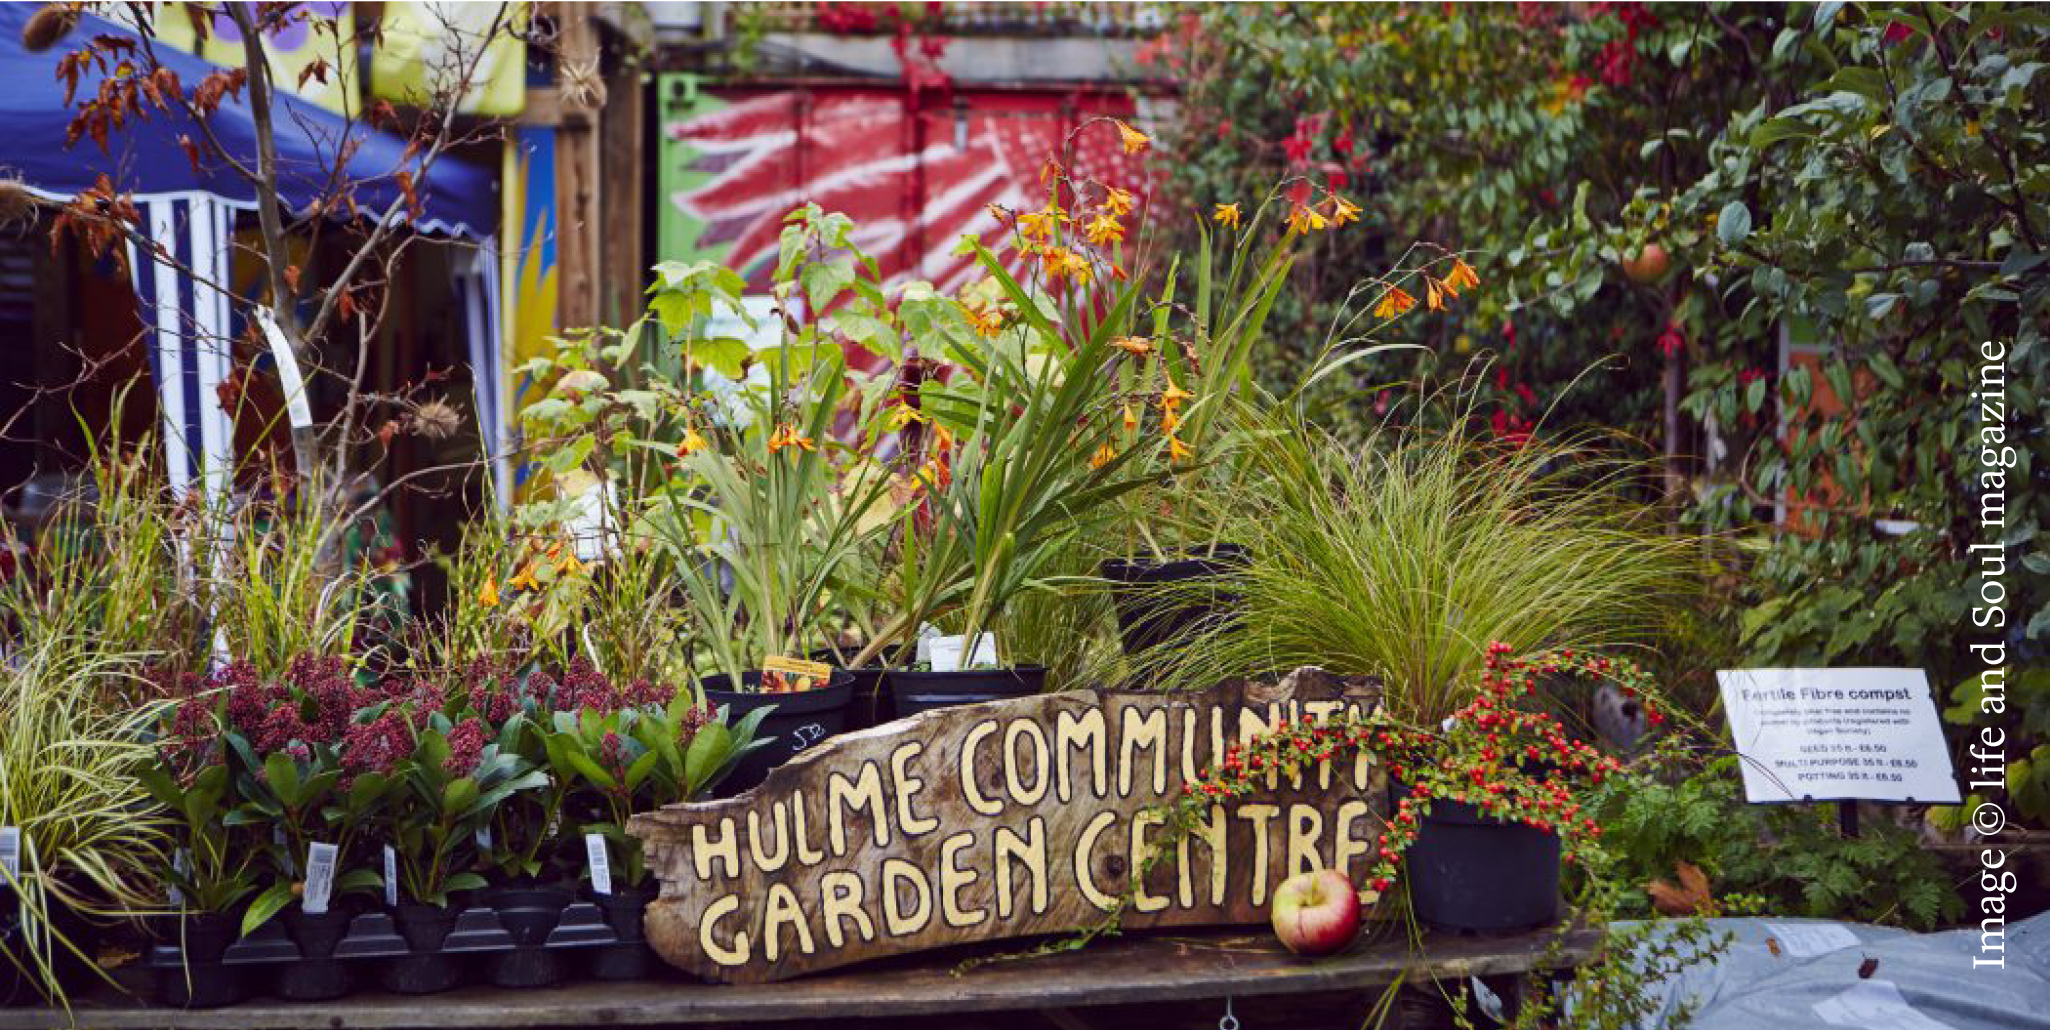 A photograph of a plant display in Hulme Garden Centre with a hand painted board with the centre's name on it